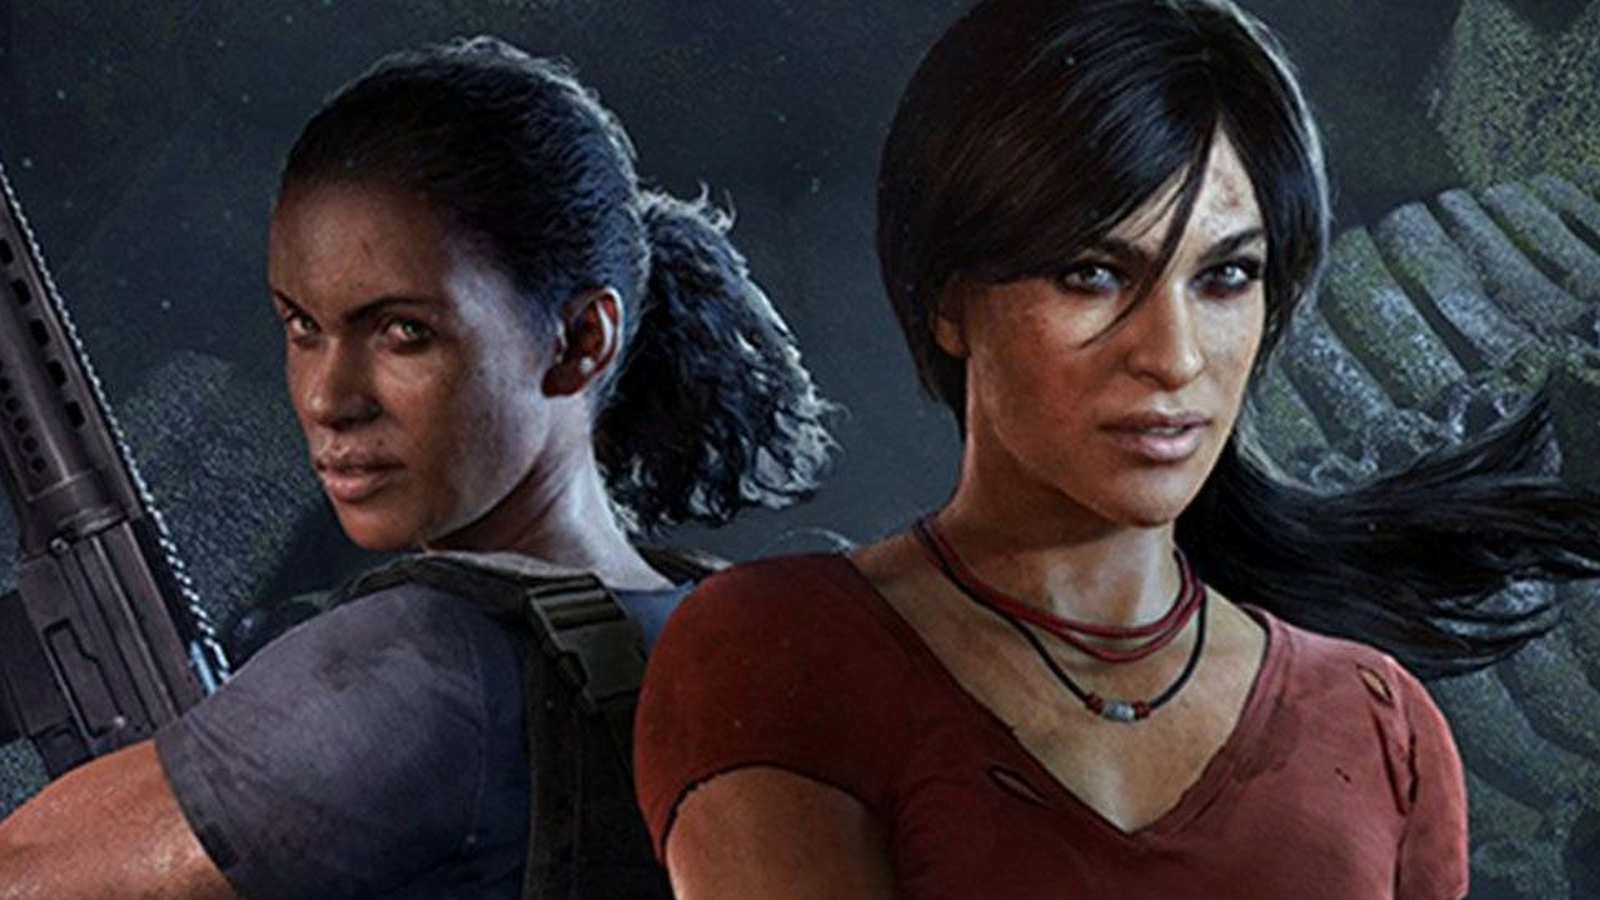 Uncharted: Legacy of Thieves Trophy Guide